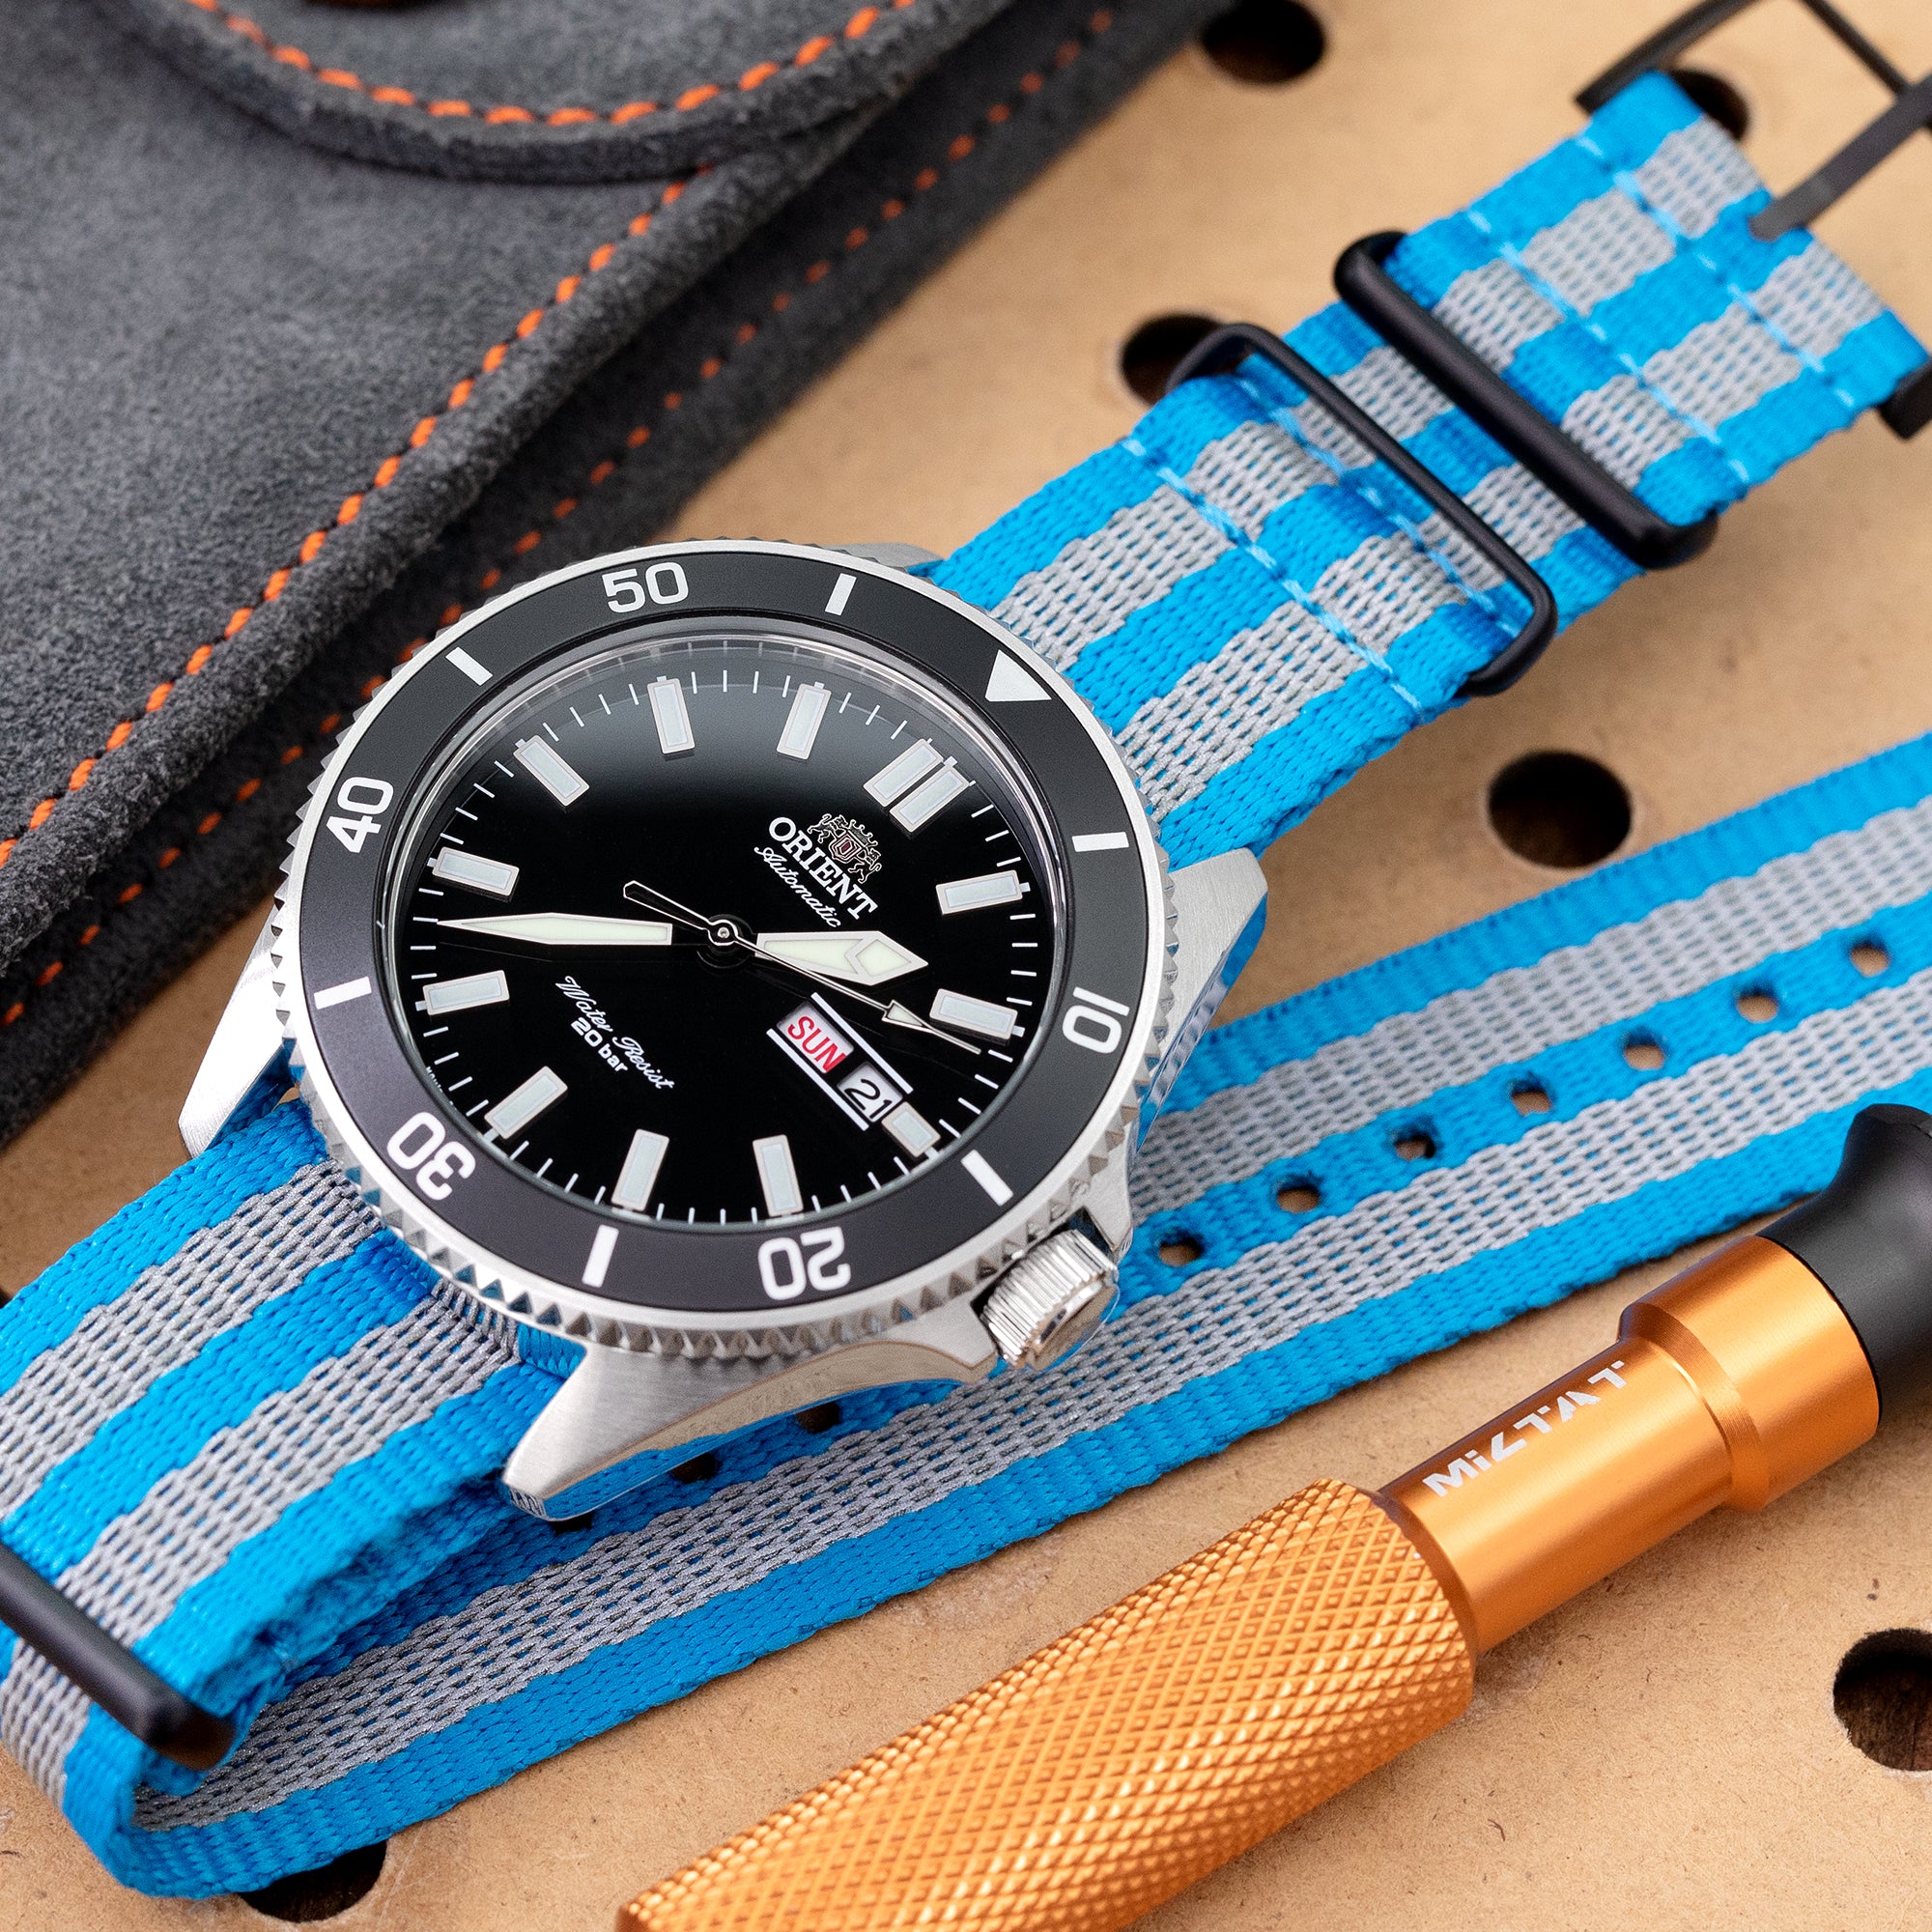 MiLTAT 22mm G10 NATO 3M Glow-in-the-Dark Watch Strap PVD Black Blue and Grey Stripes Strapcode Watch Bands